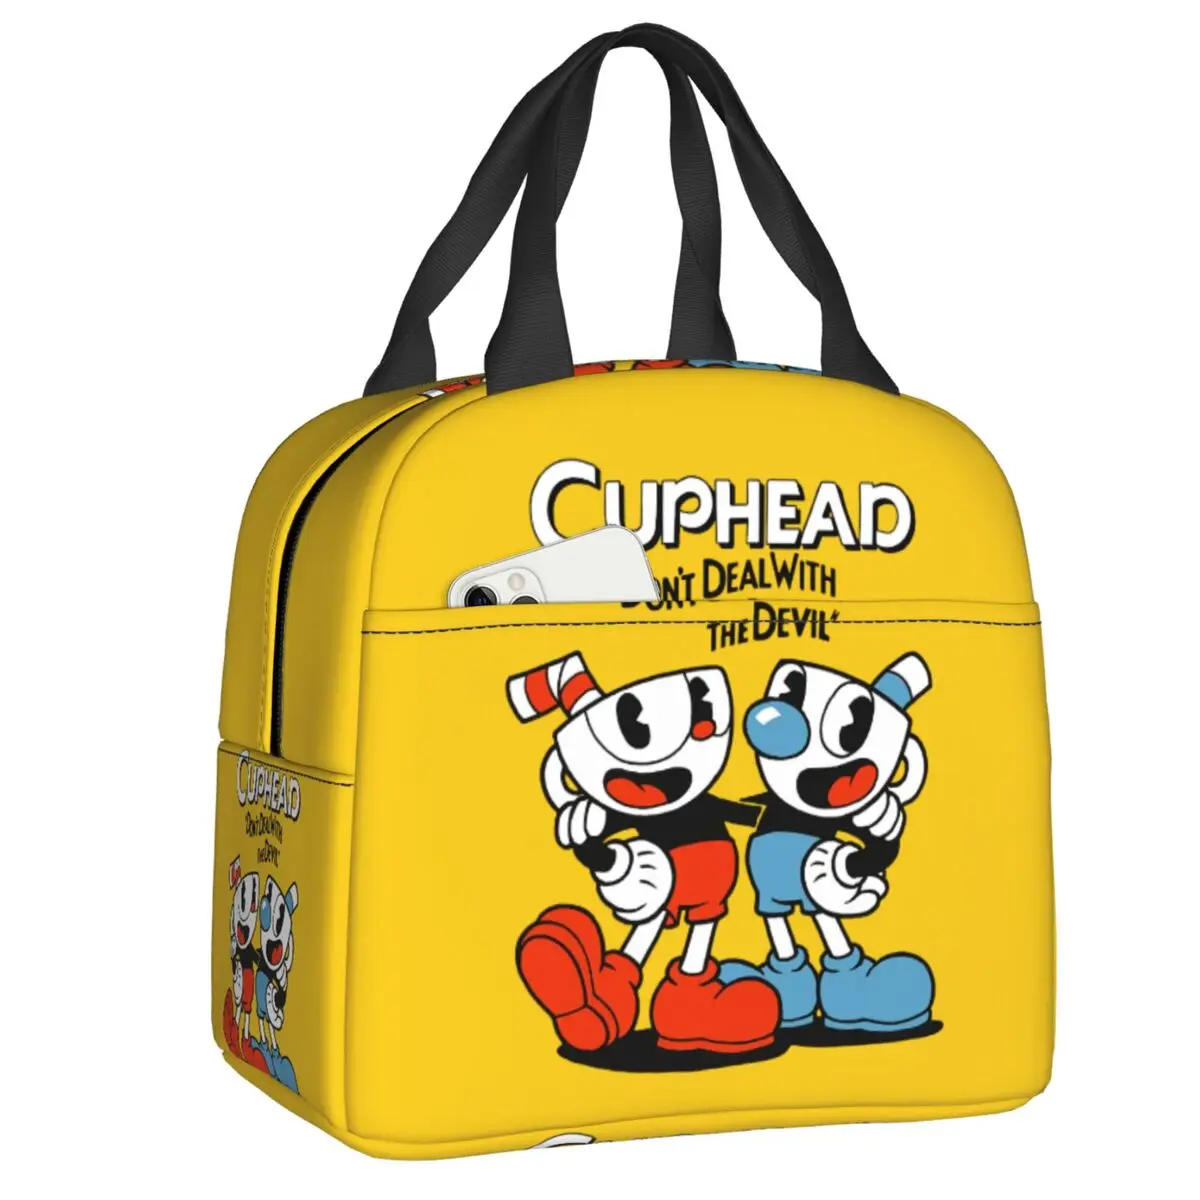 https://ae01.alicdn.com/kf/S6e43e4e34f7c4502a62a46fd52c76c36q/Hot-Game-Cuphead-Mugman-Lunch-Bag-for-Work-School-Waterproof-Cooler-Thermal-Insulated-Lunch-Box-Women.jpg